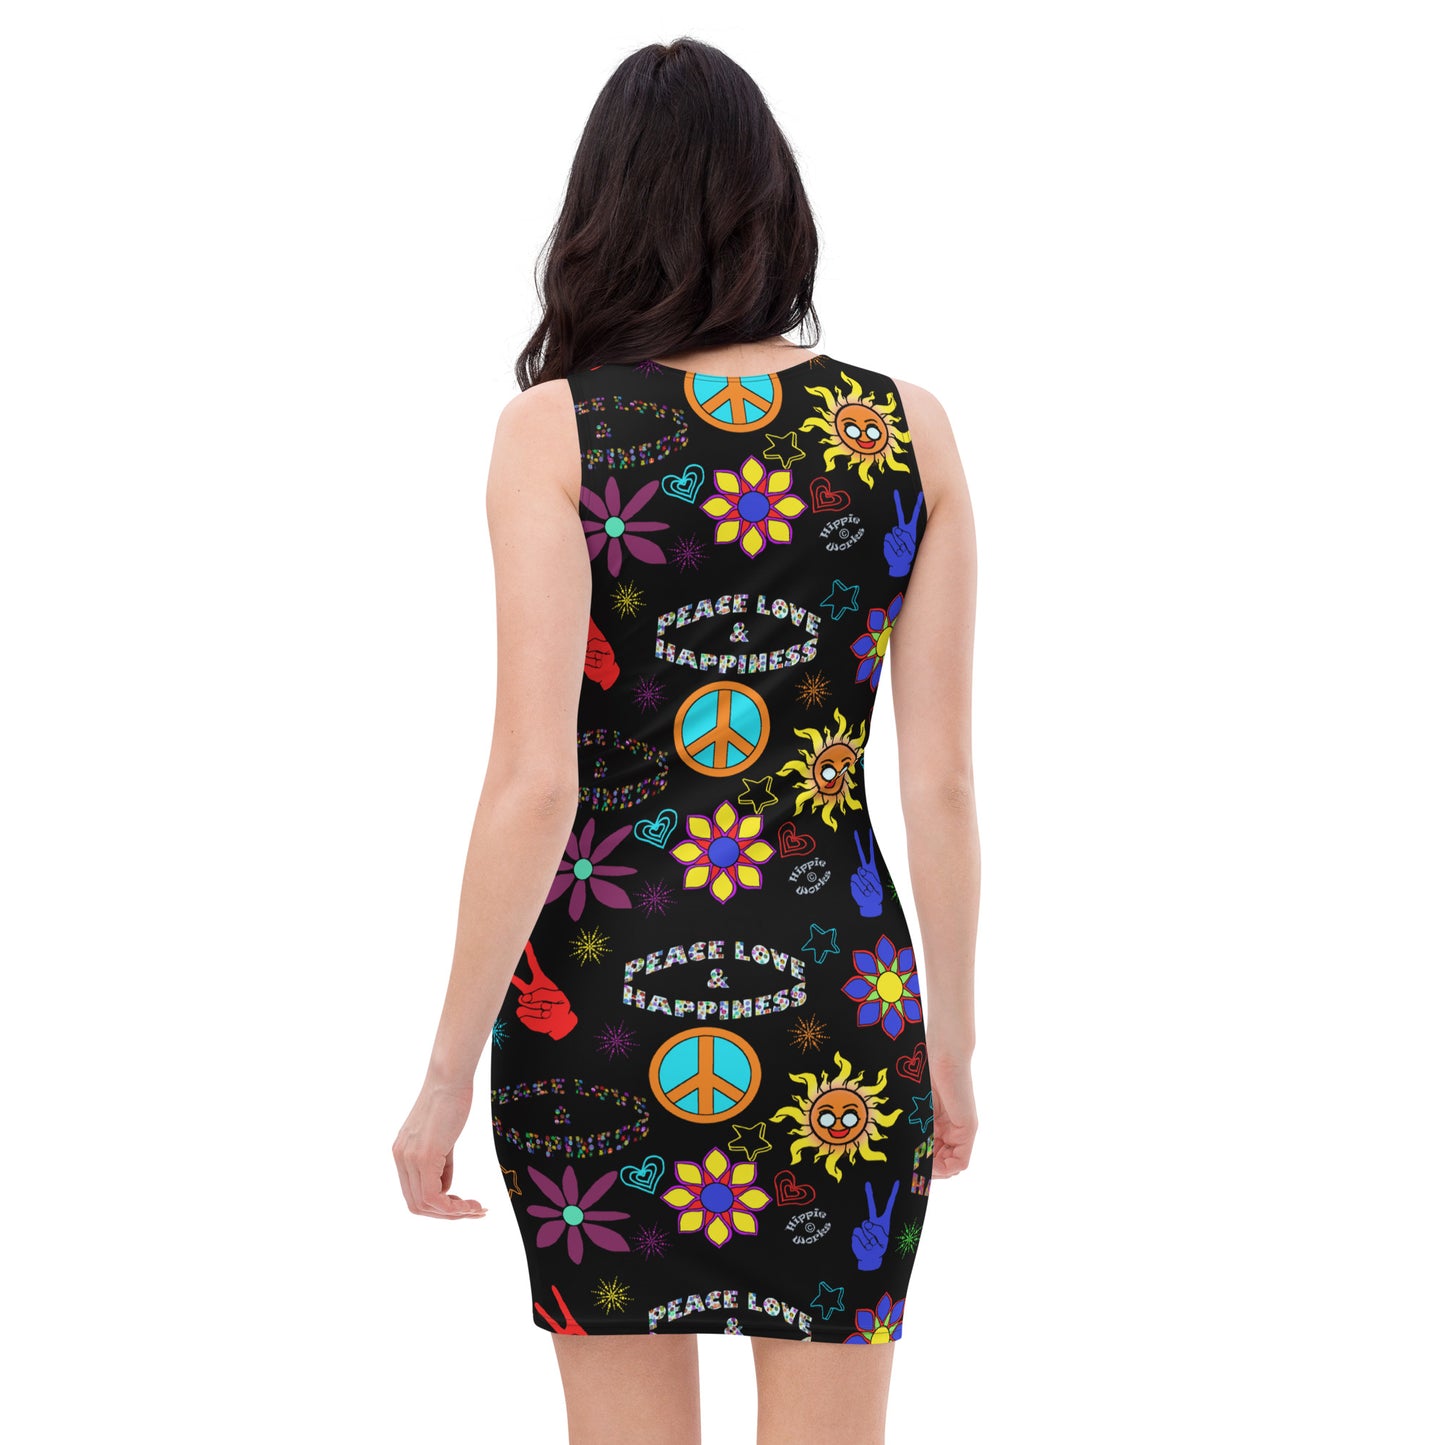 "Peace Love and Happiness" Sublimation Cut & Sew Dress